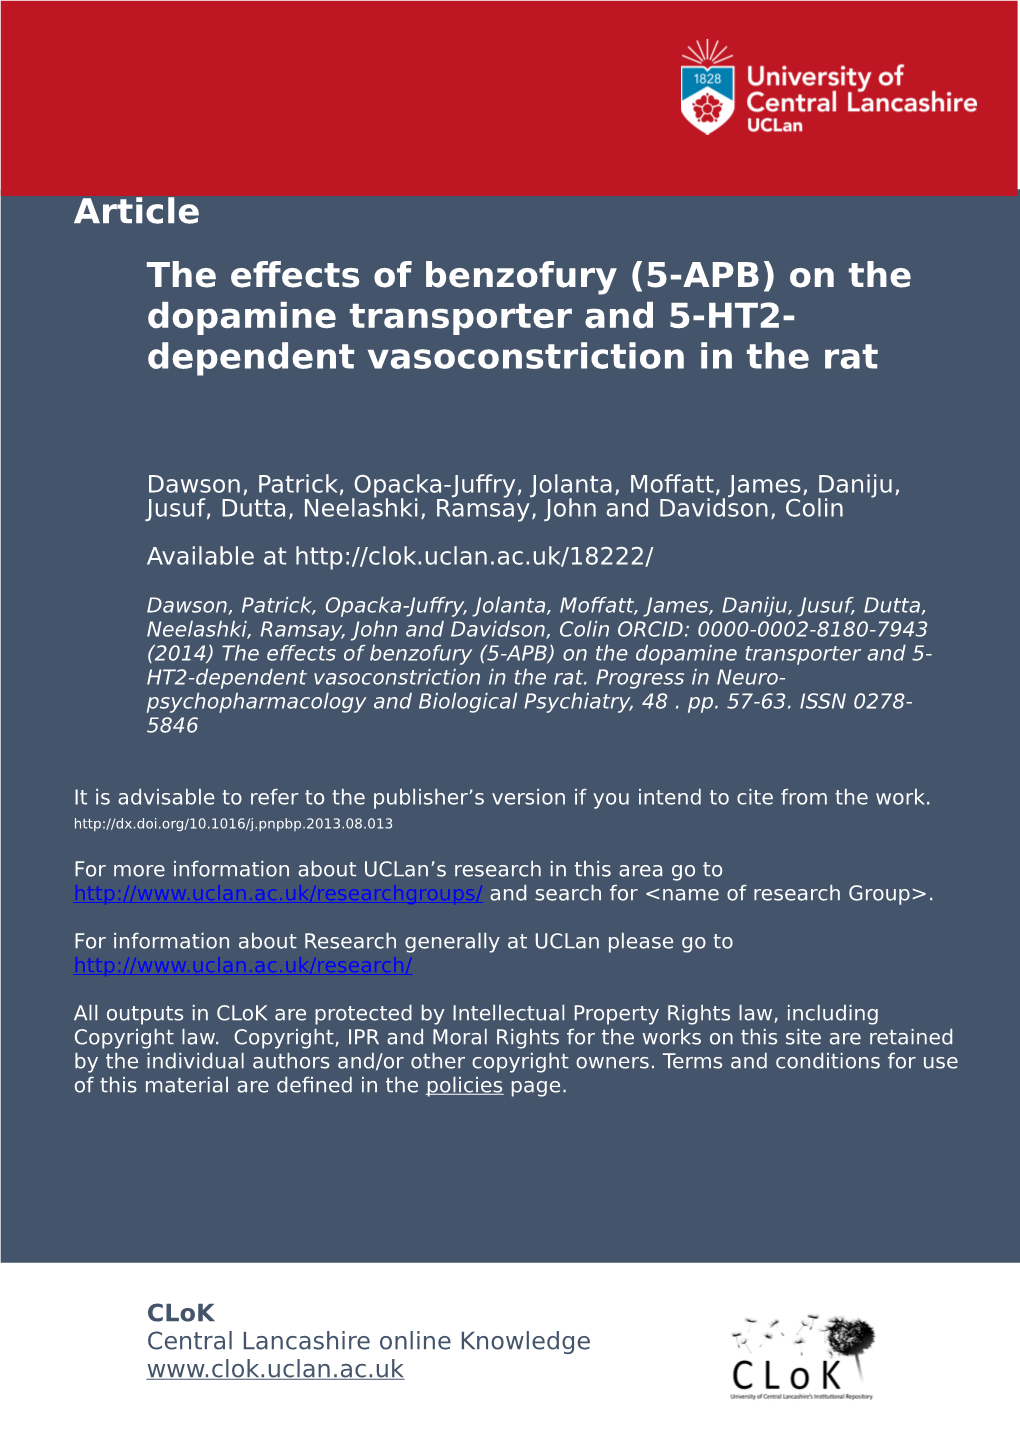 The Effects of Benzofury (5-APB) on the Dopamine Transporter and 5-HT2- Dependent Vasoconstriction in the Rat